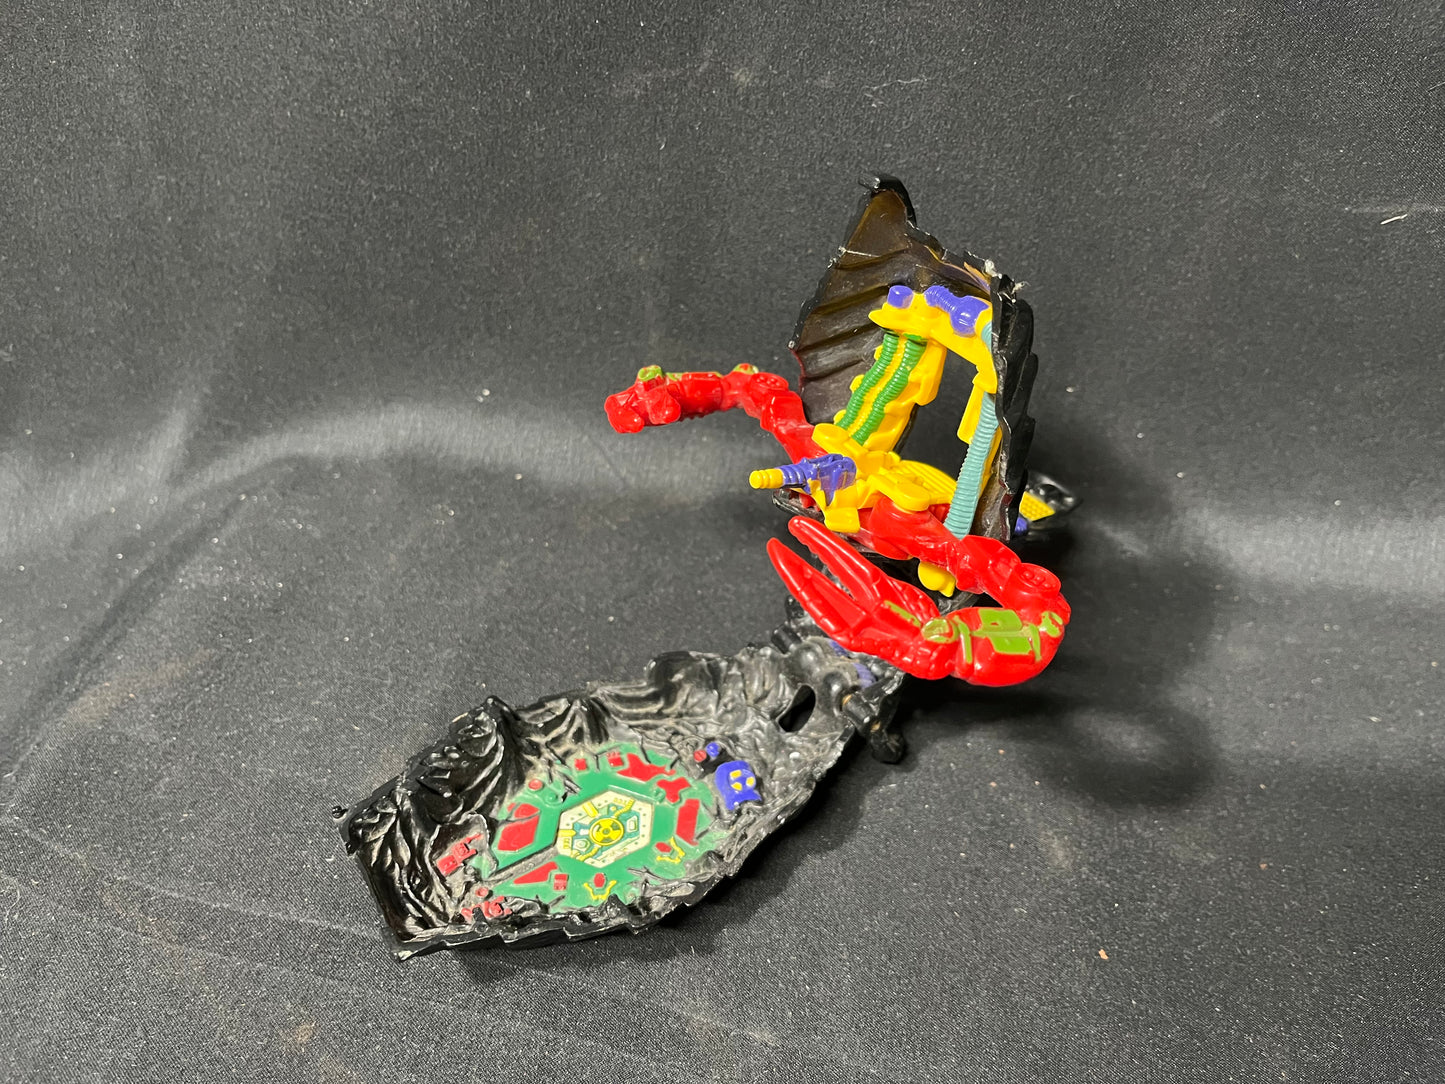 Mighty Max Stings Scorpion Playset by Bluebird Toys PLC